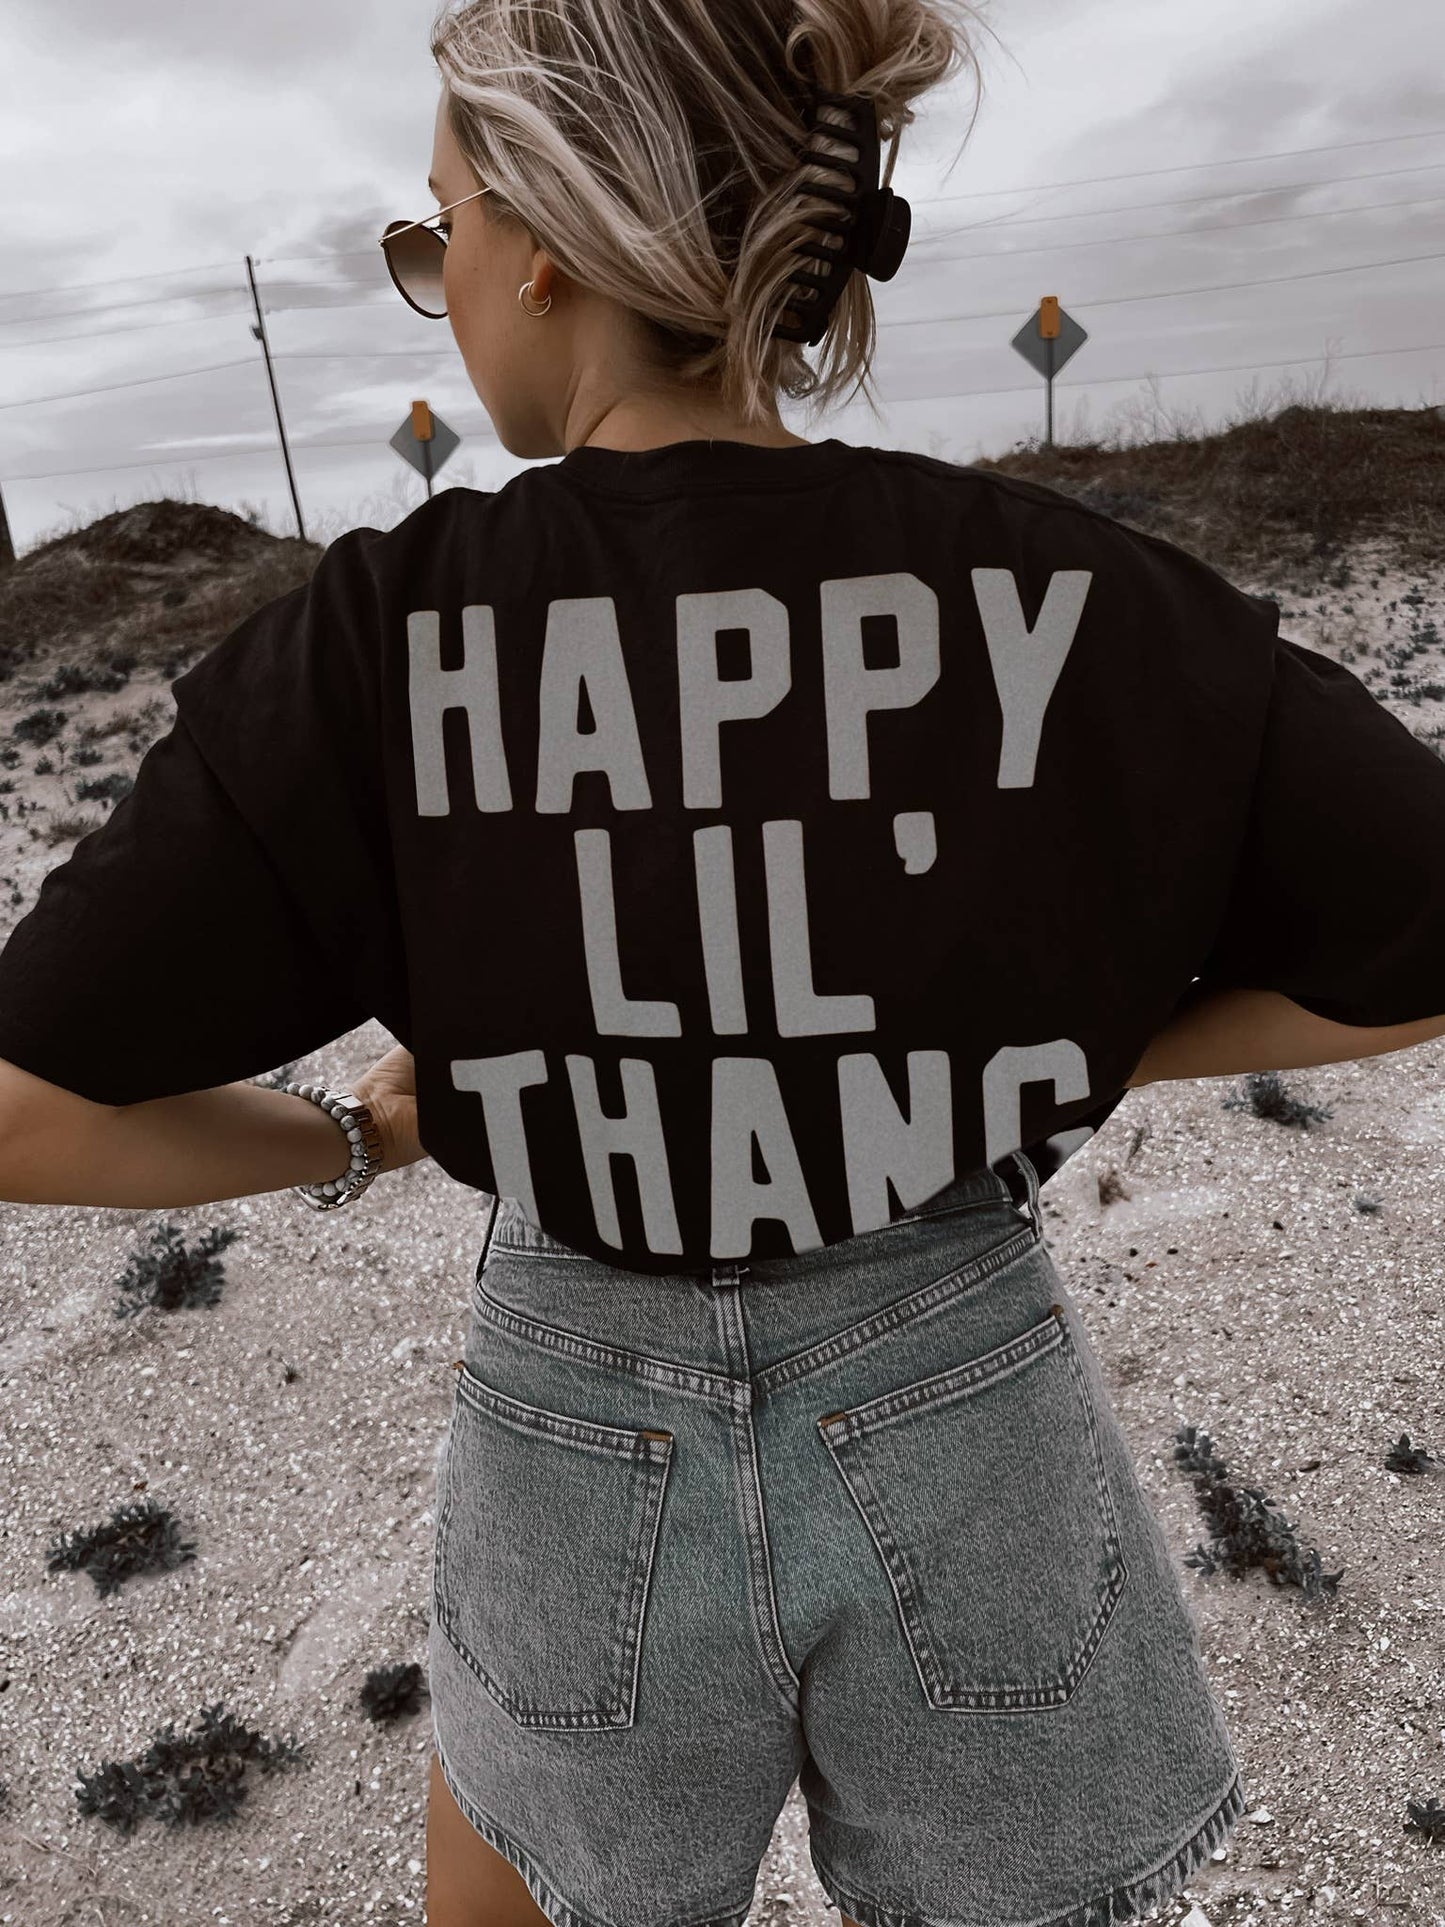 Happy Lil Thang Graphic Tee